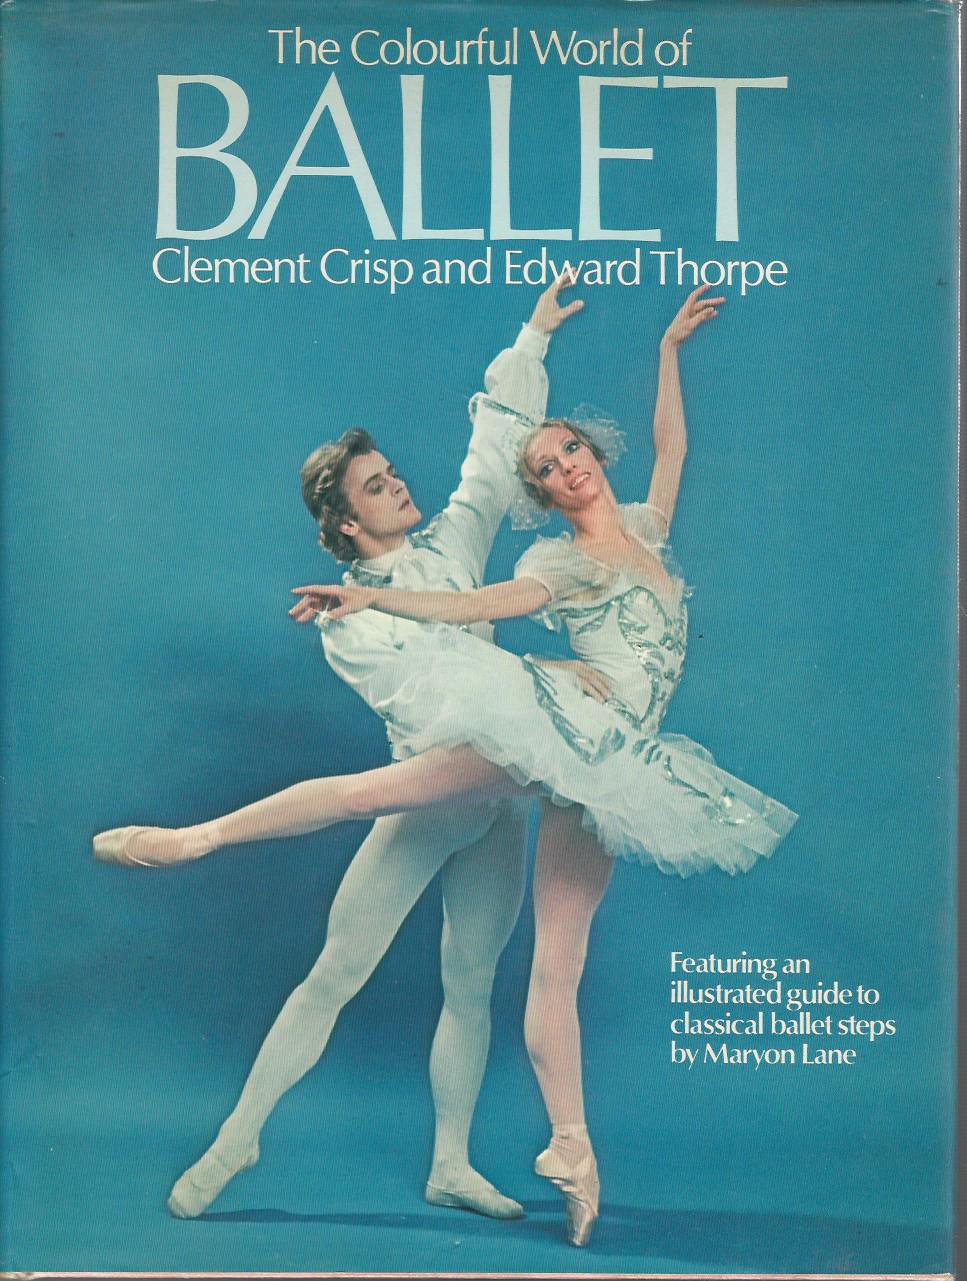 Crisp, Clement and Thorpe, Edward - The colourful world of ballet